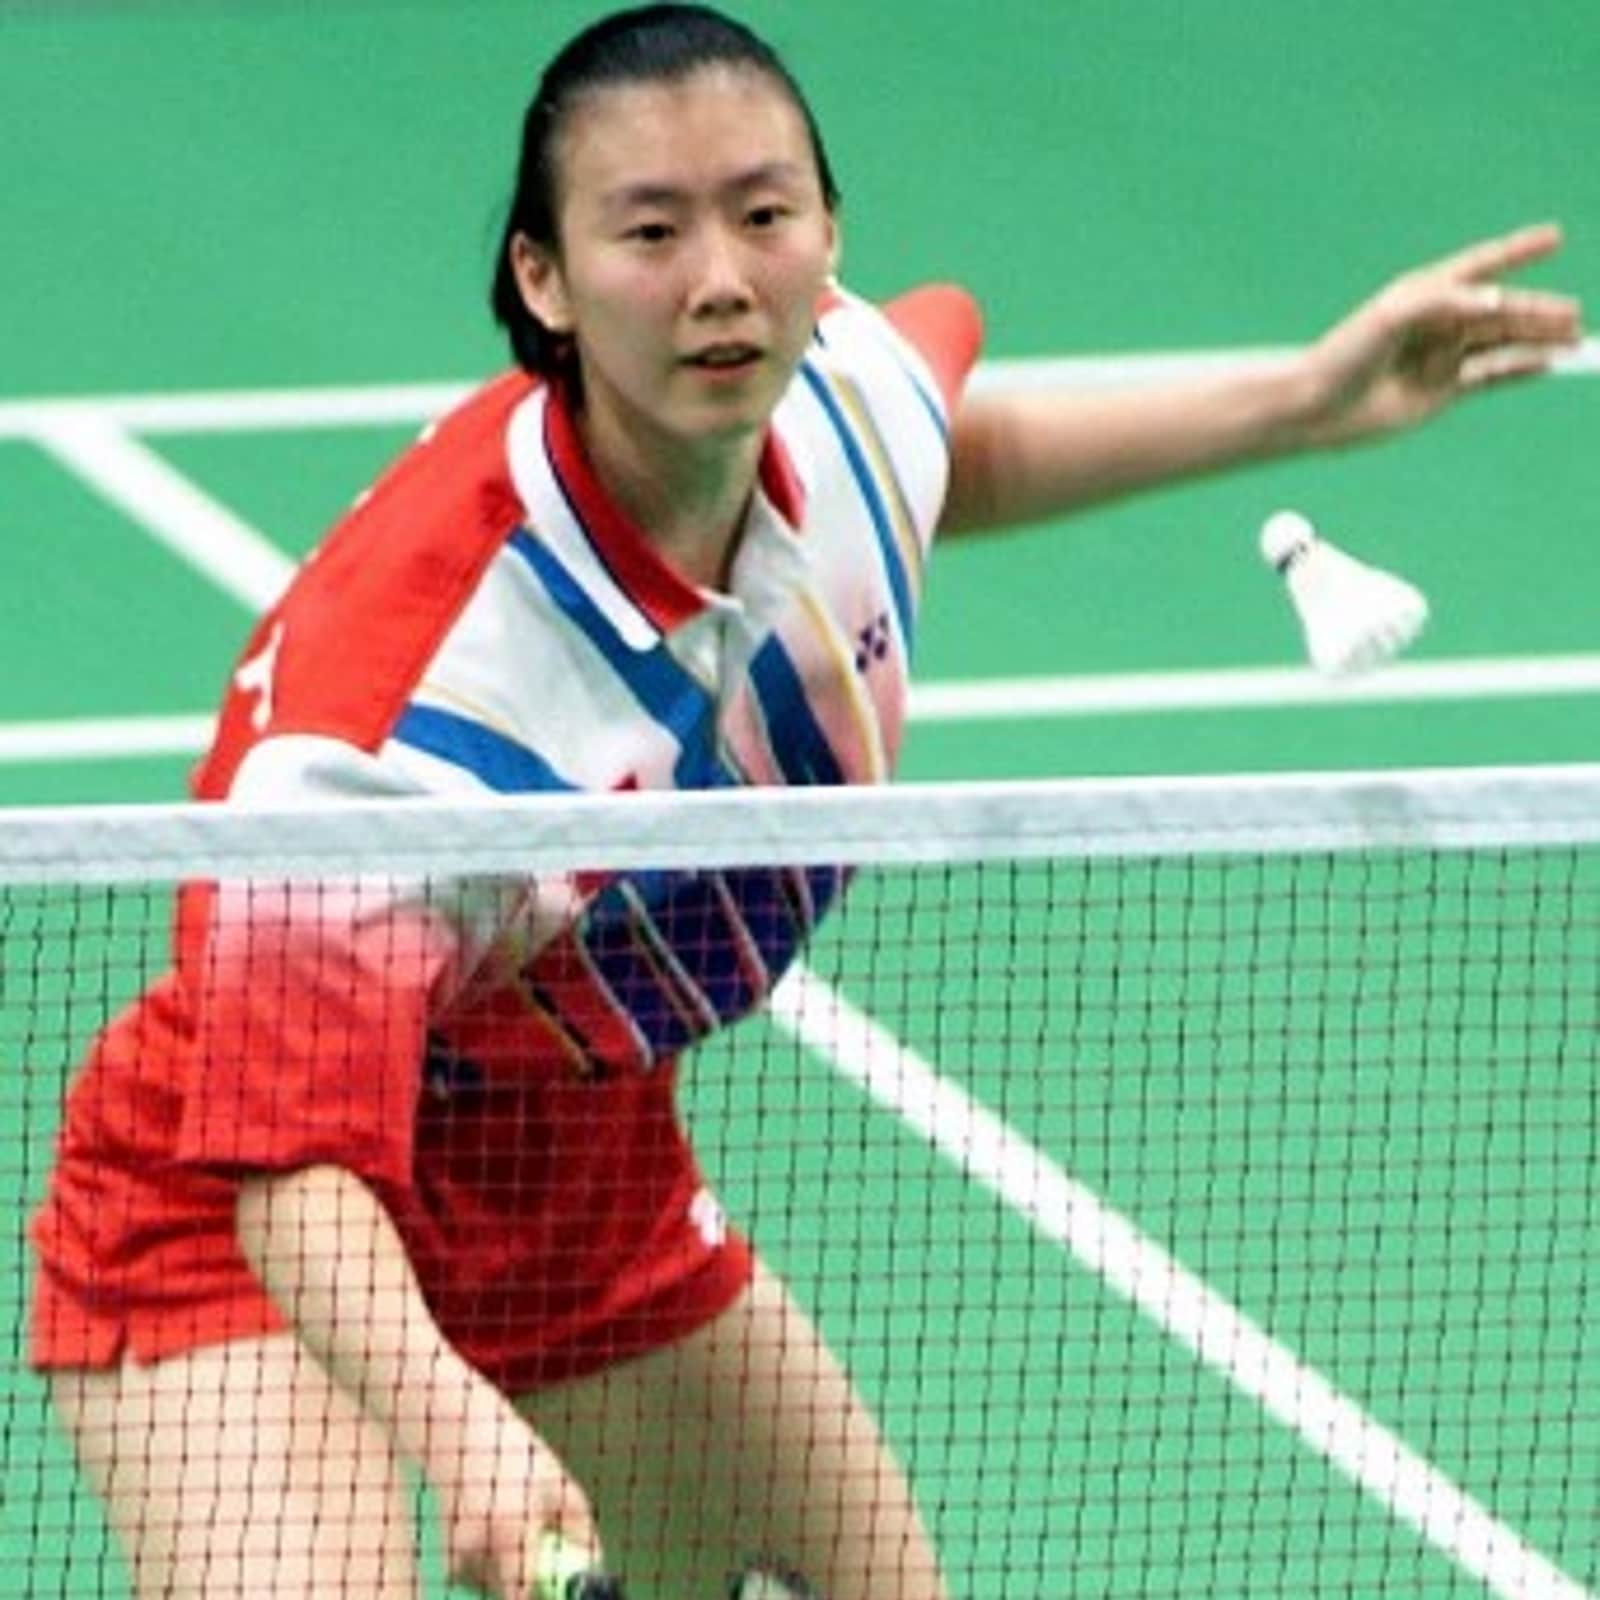 Chinese Badminton Star Ordered to Throw Olympic Semi in Sydney 2000